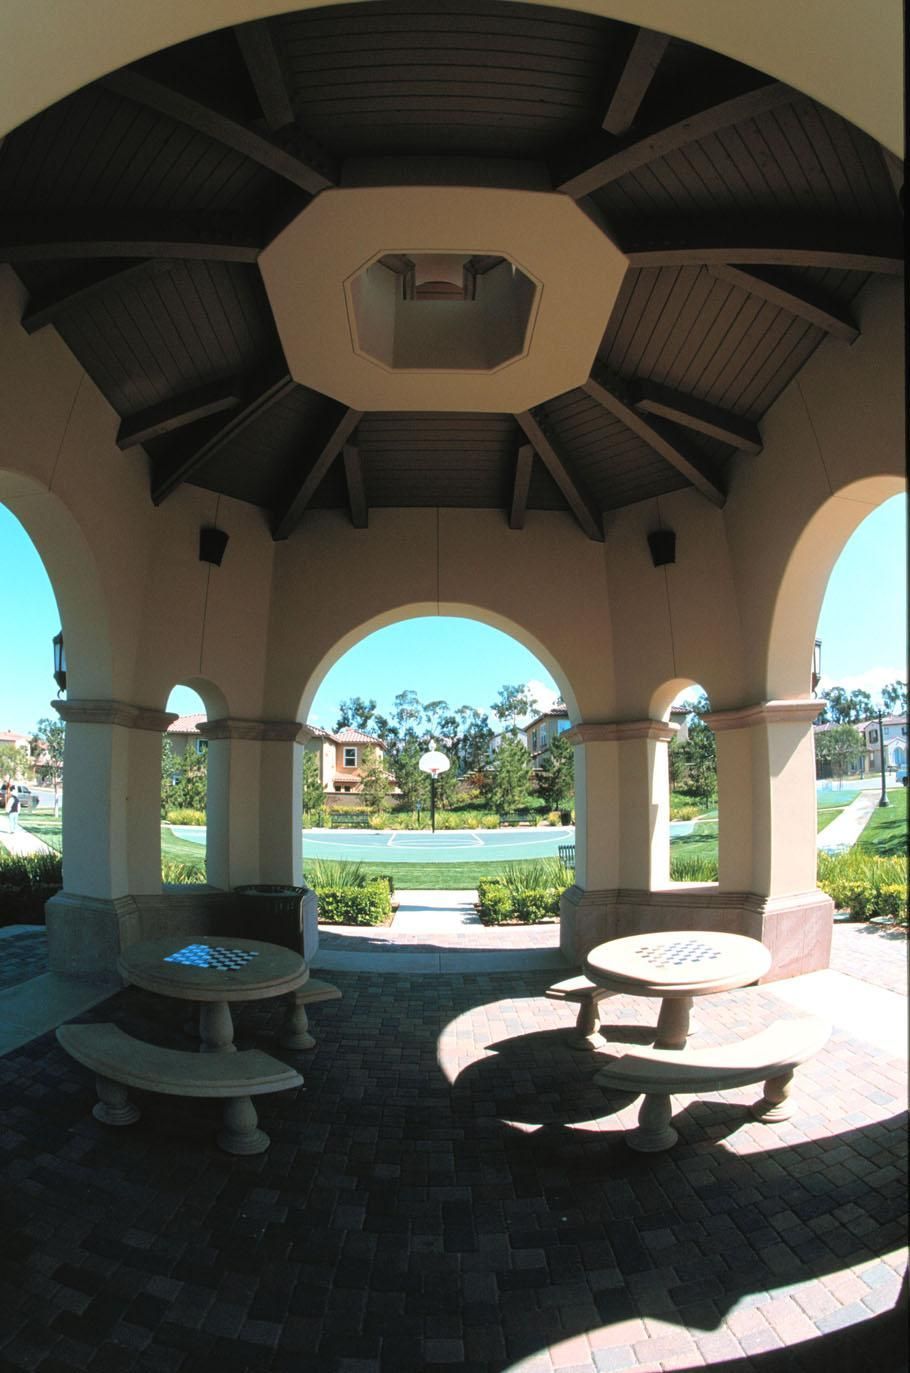 Northpark #12 Park Mini Dome — San Clemente, CA — Consolidated Contracting